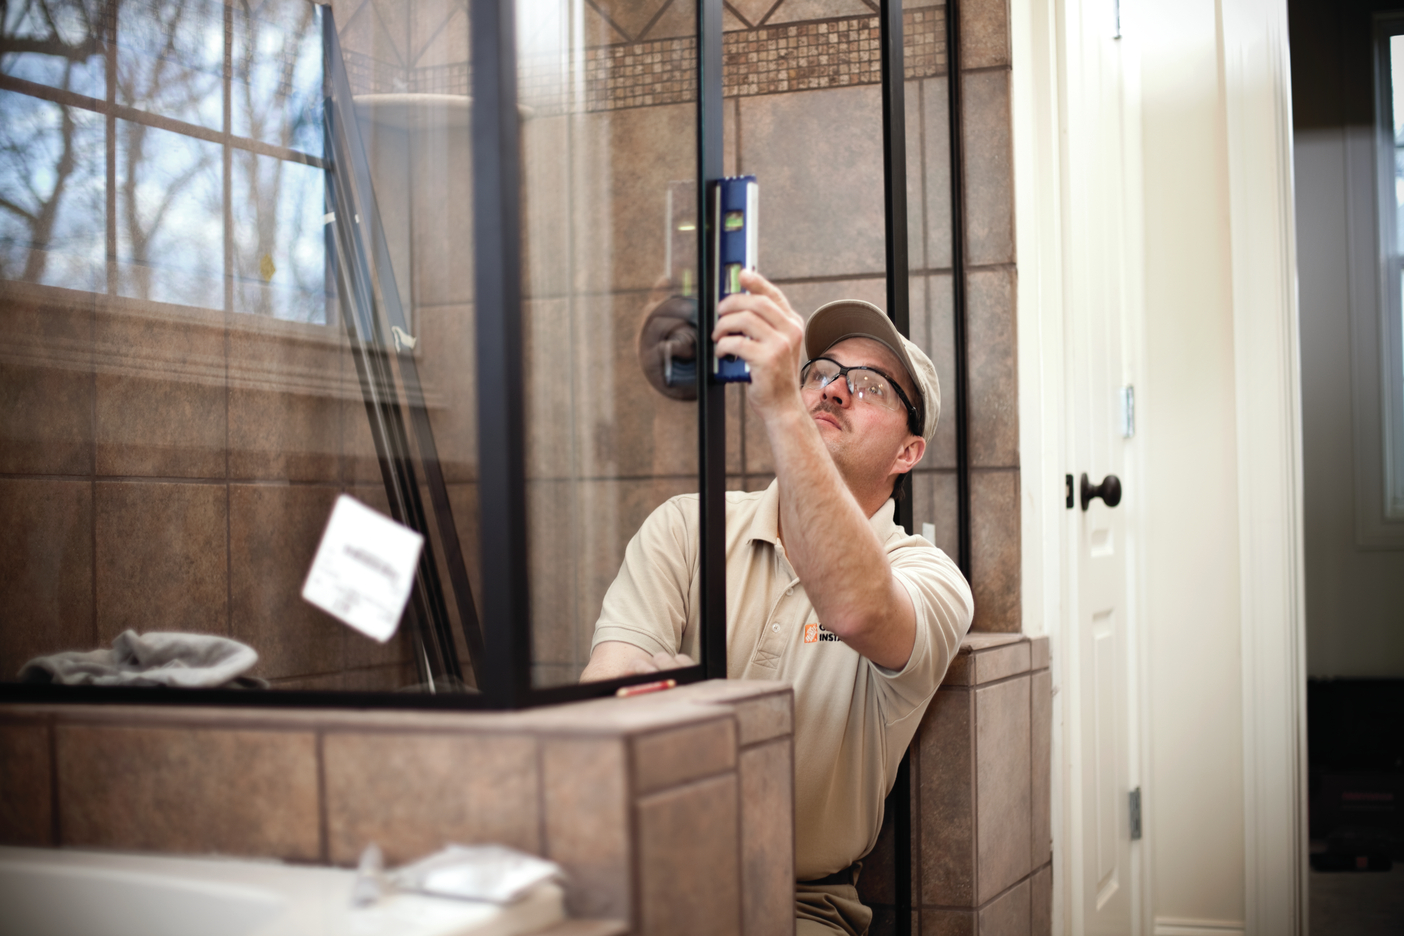 Home Services at The Home Depot - San Antonio, TX | www ...